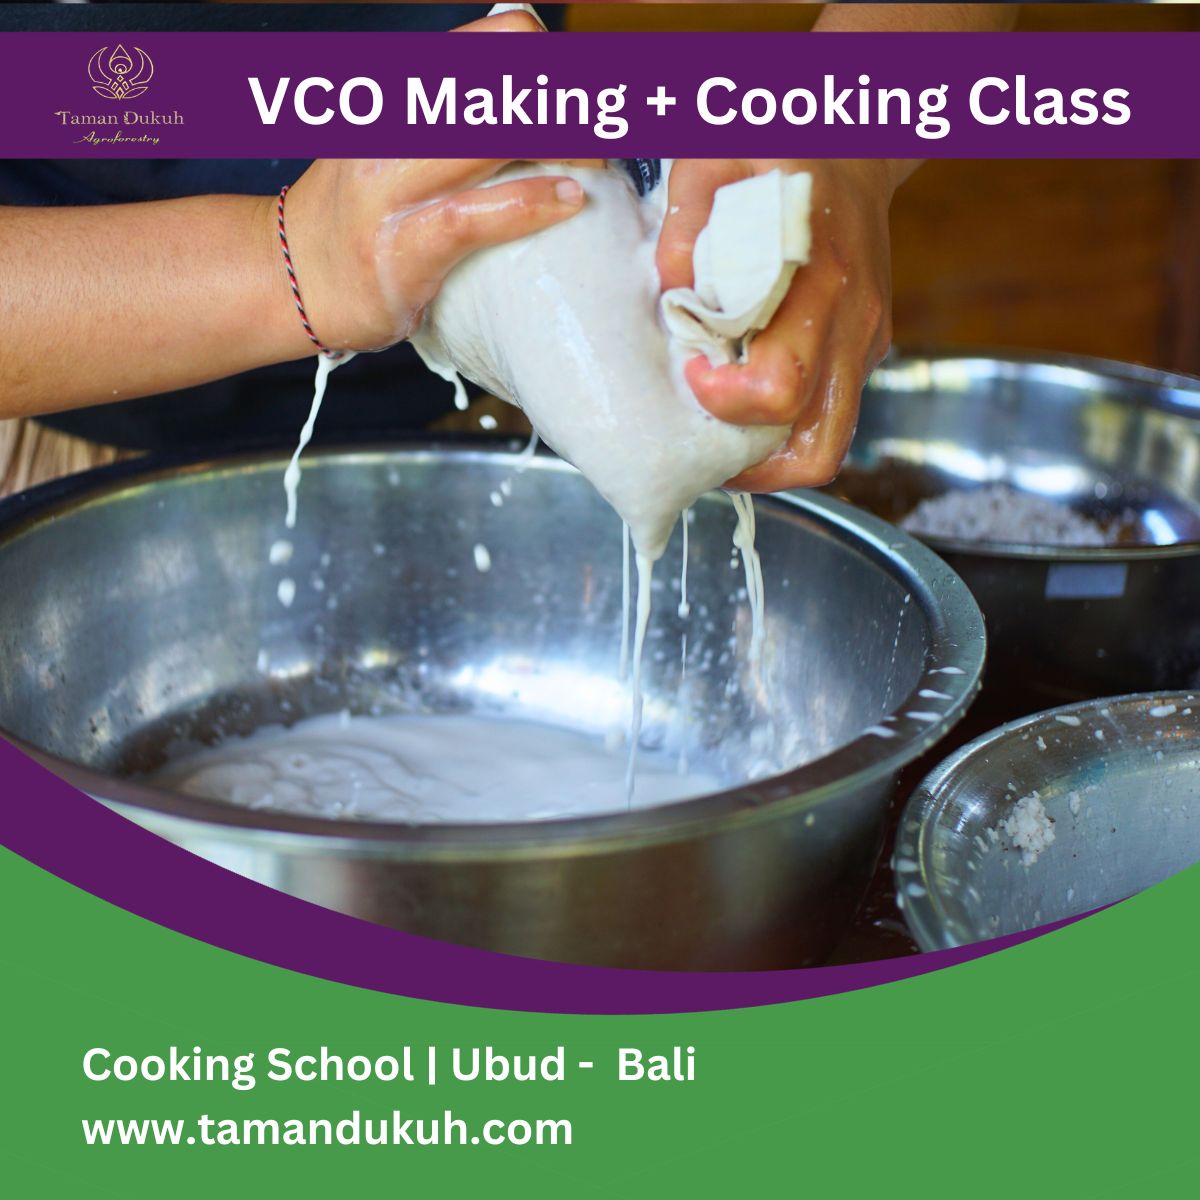 Taman Dukuh VCO making and cooking class